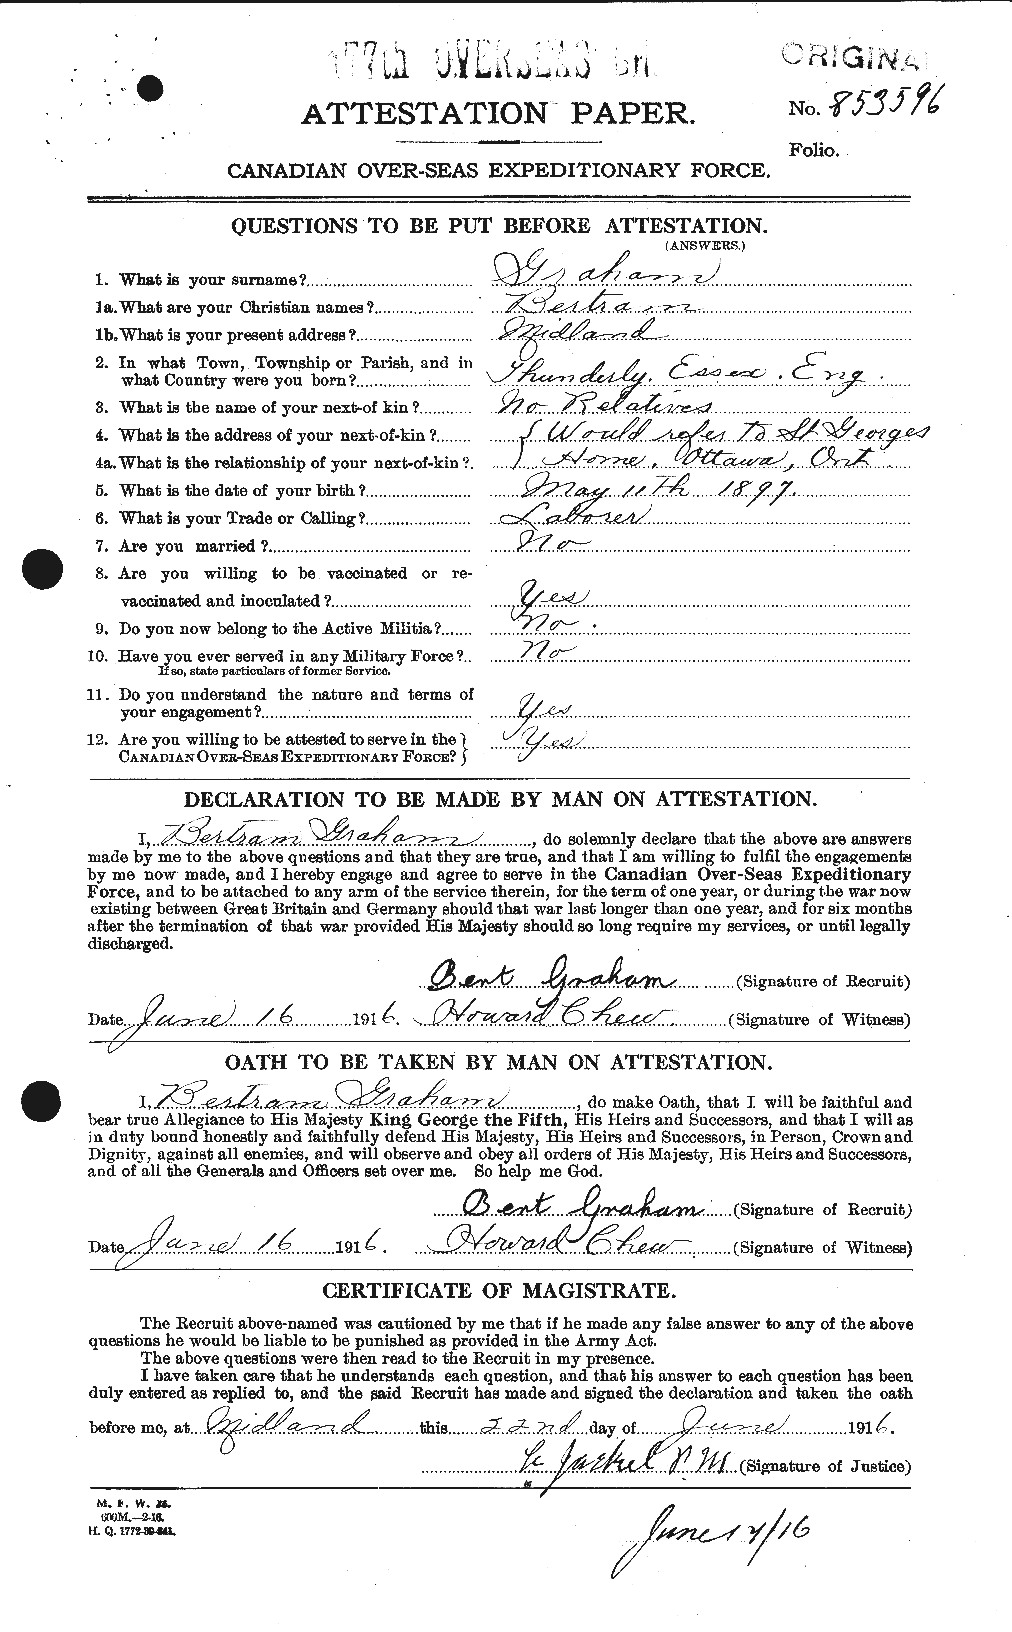 Personnel Records of the First World War - CEF 359670a